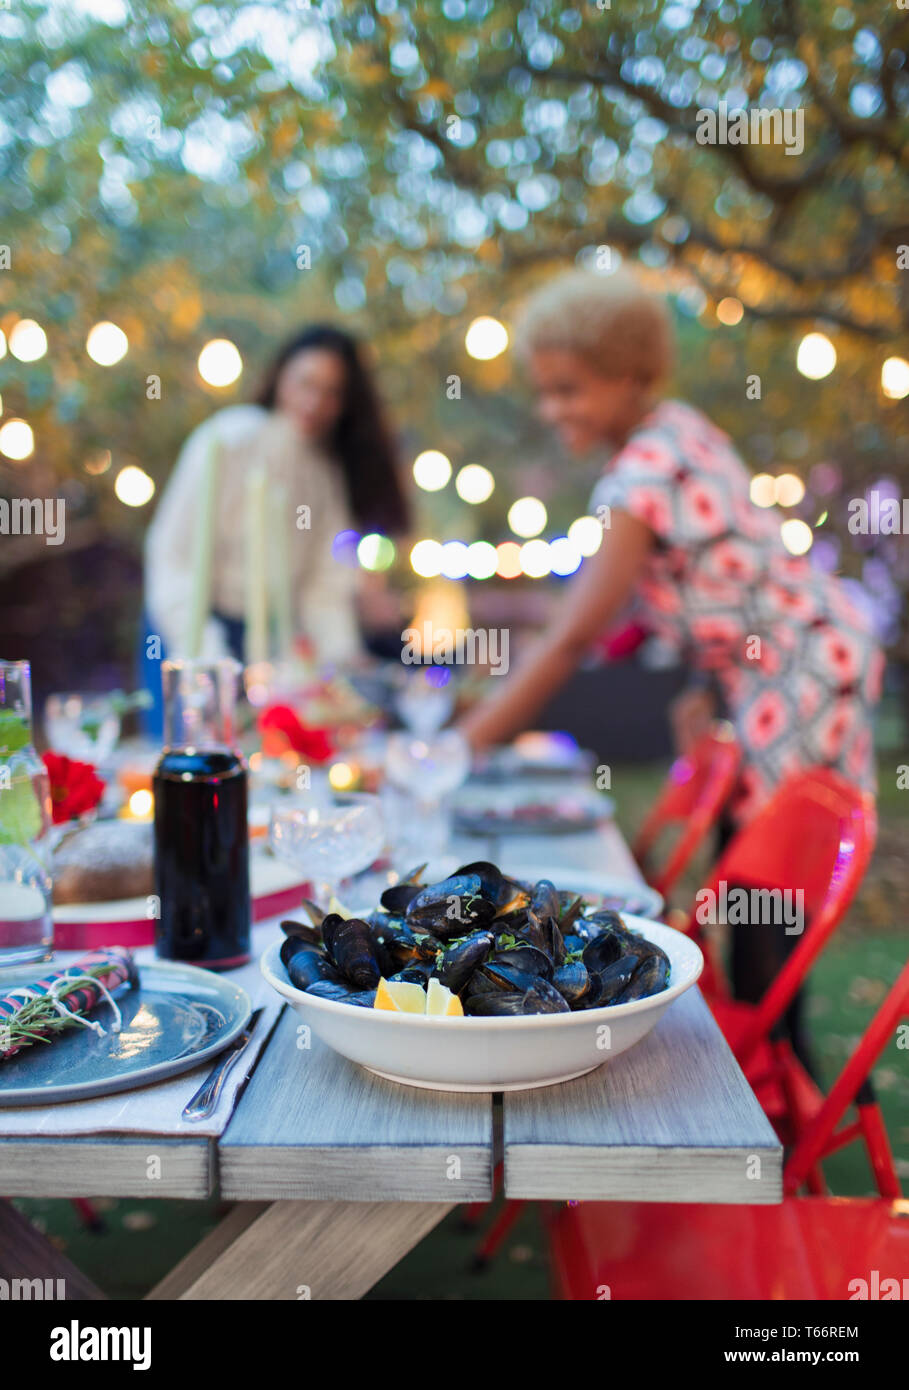 Mussels on dinner garden party table Stock Photo